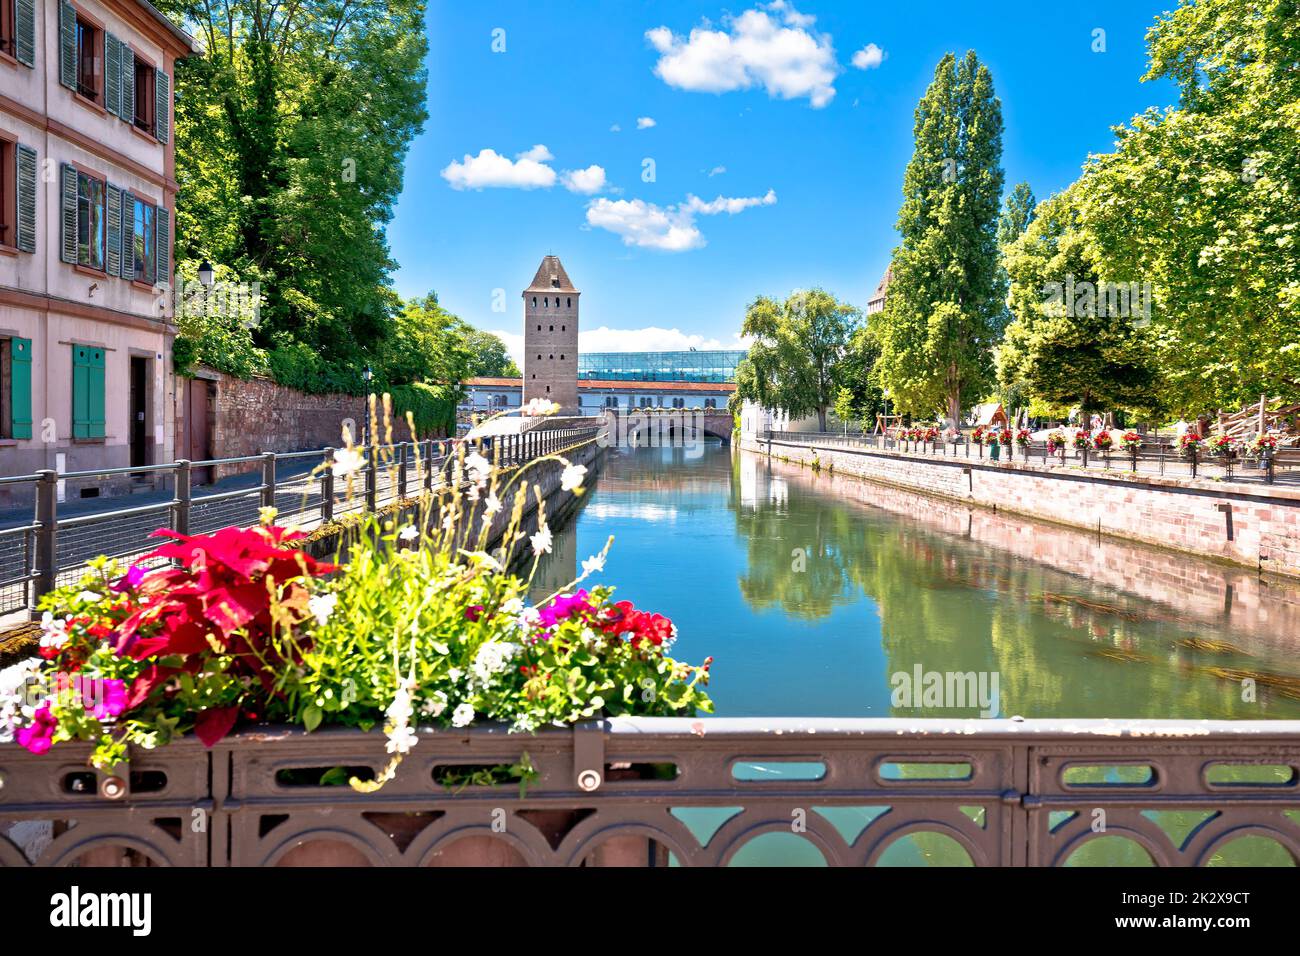 Town of Strasbourg canal colorful view Stock Photo